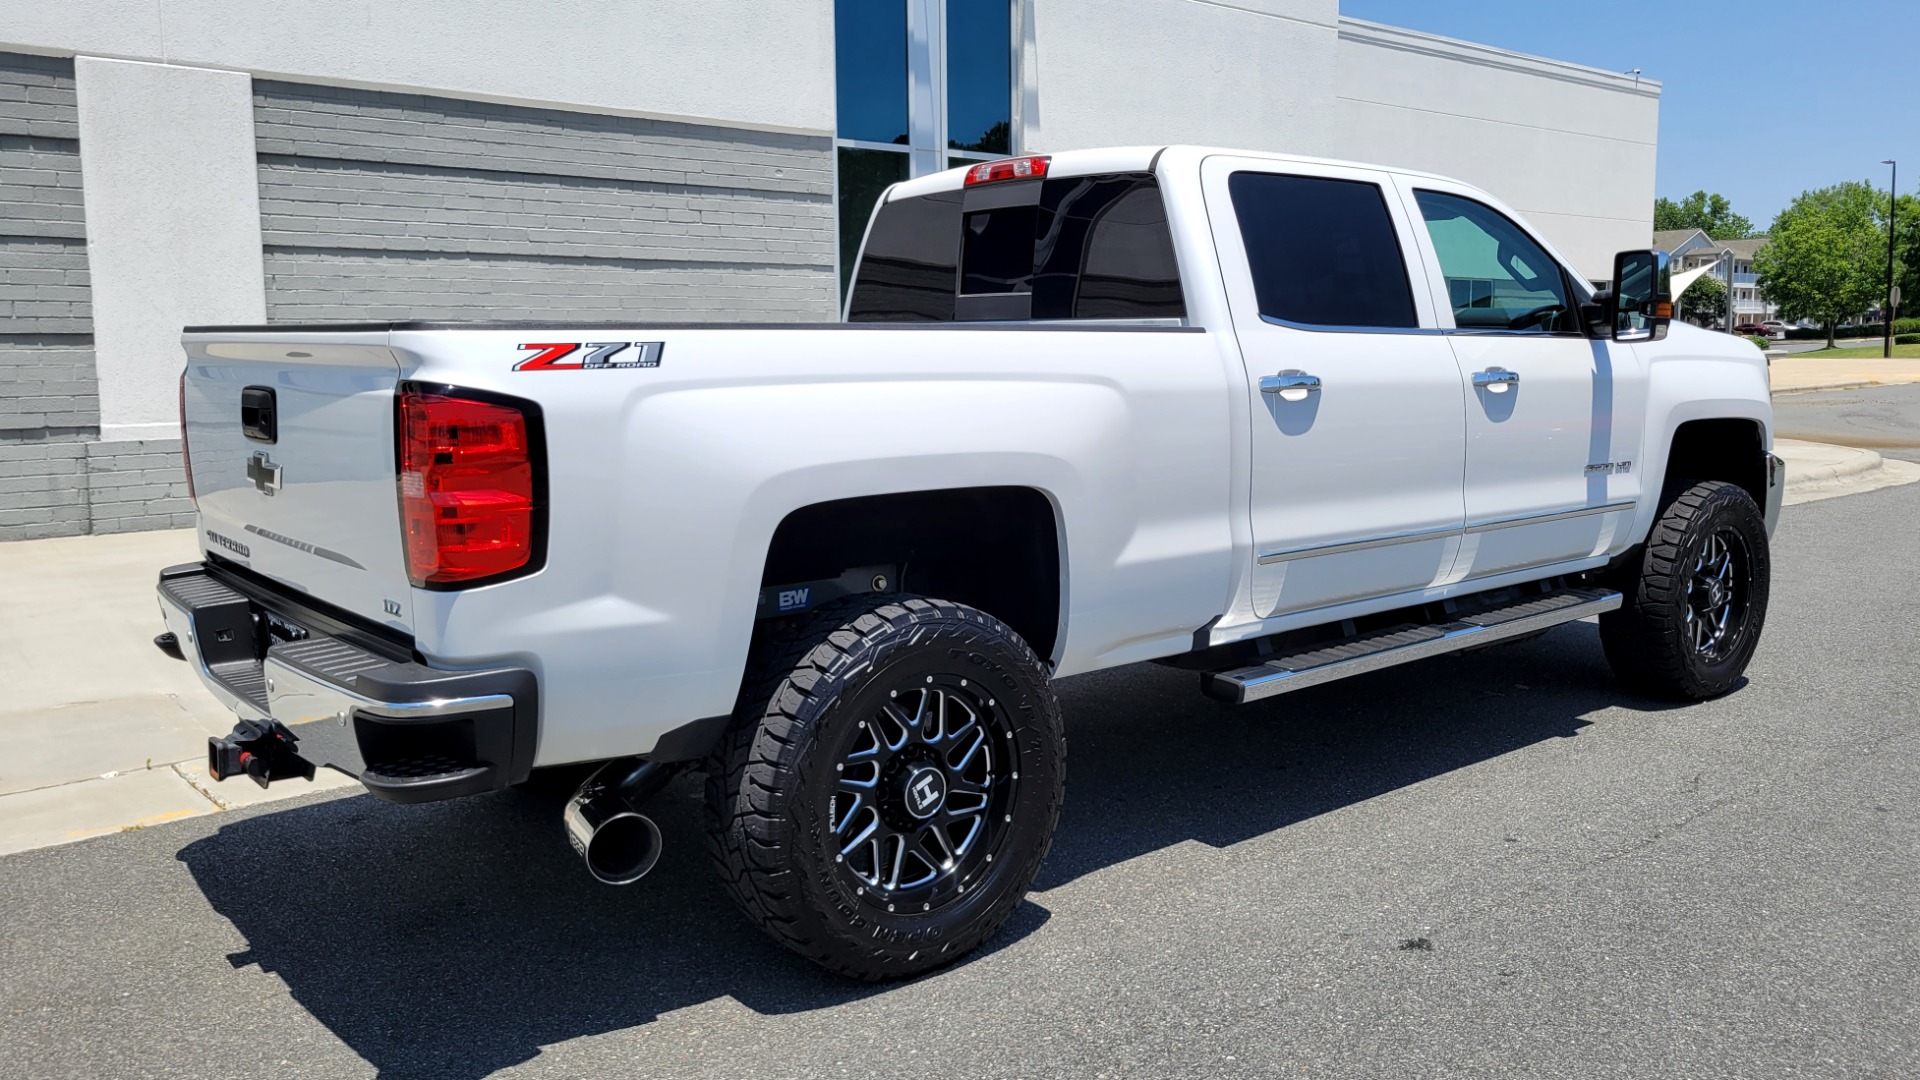 Used 2018 Chevrolet SILVERADO 2500HD LTZ CREWCAB / 6.6L / NAV / SUNROOF / BOSE / 5TH WHL / REARVIEW for sale Sold at Formula Imports in Charlotte NC 28227 11